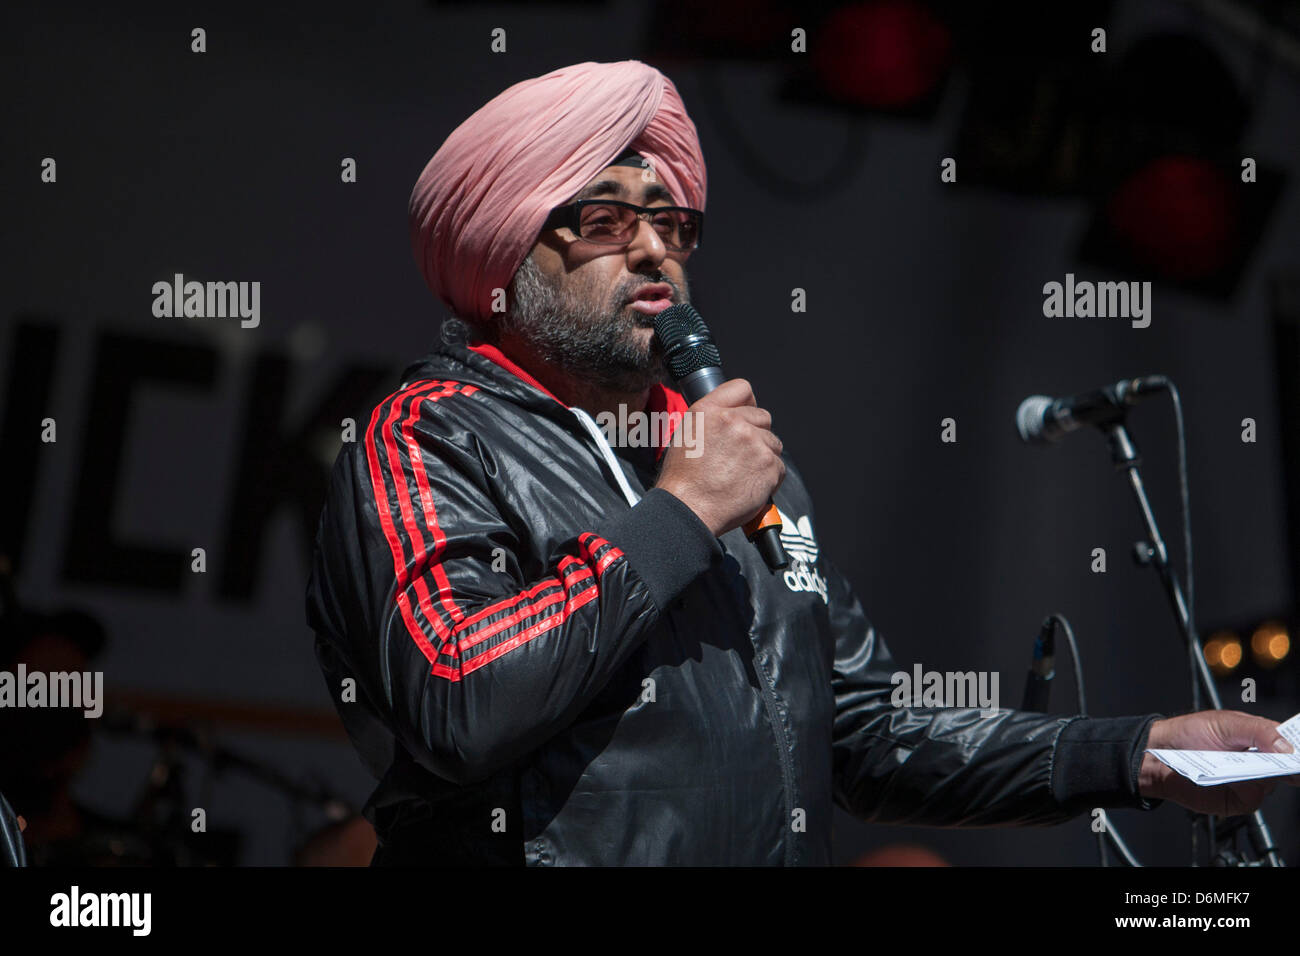 London, UK. 20th April, 2013. Comedian Hardeep Singh Kohli introduces the Live music on Record Store Day at Sister Ray Records on Berwick Street. Record Store Day came into being in 2007 when over 700 independent stores in the USA came together to celebrate their unique culture. The UK followed suit and 2013 will see the sixth celebration of the UK's unique independent sector. Credit: Martin Wheatley/Alamy Live News Stock Photo